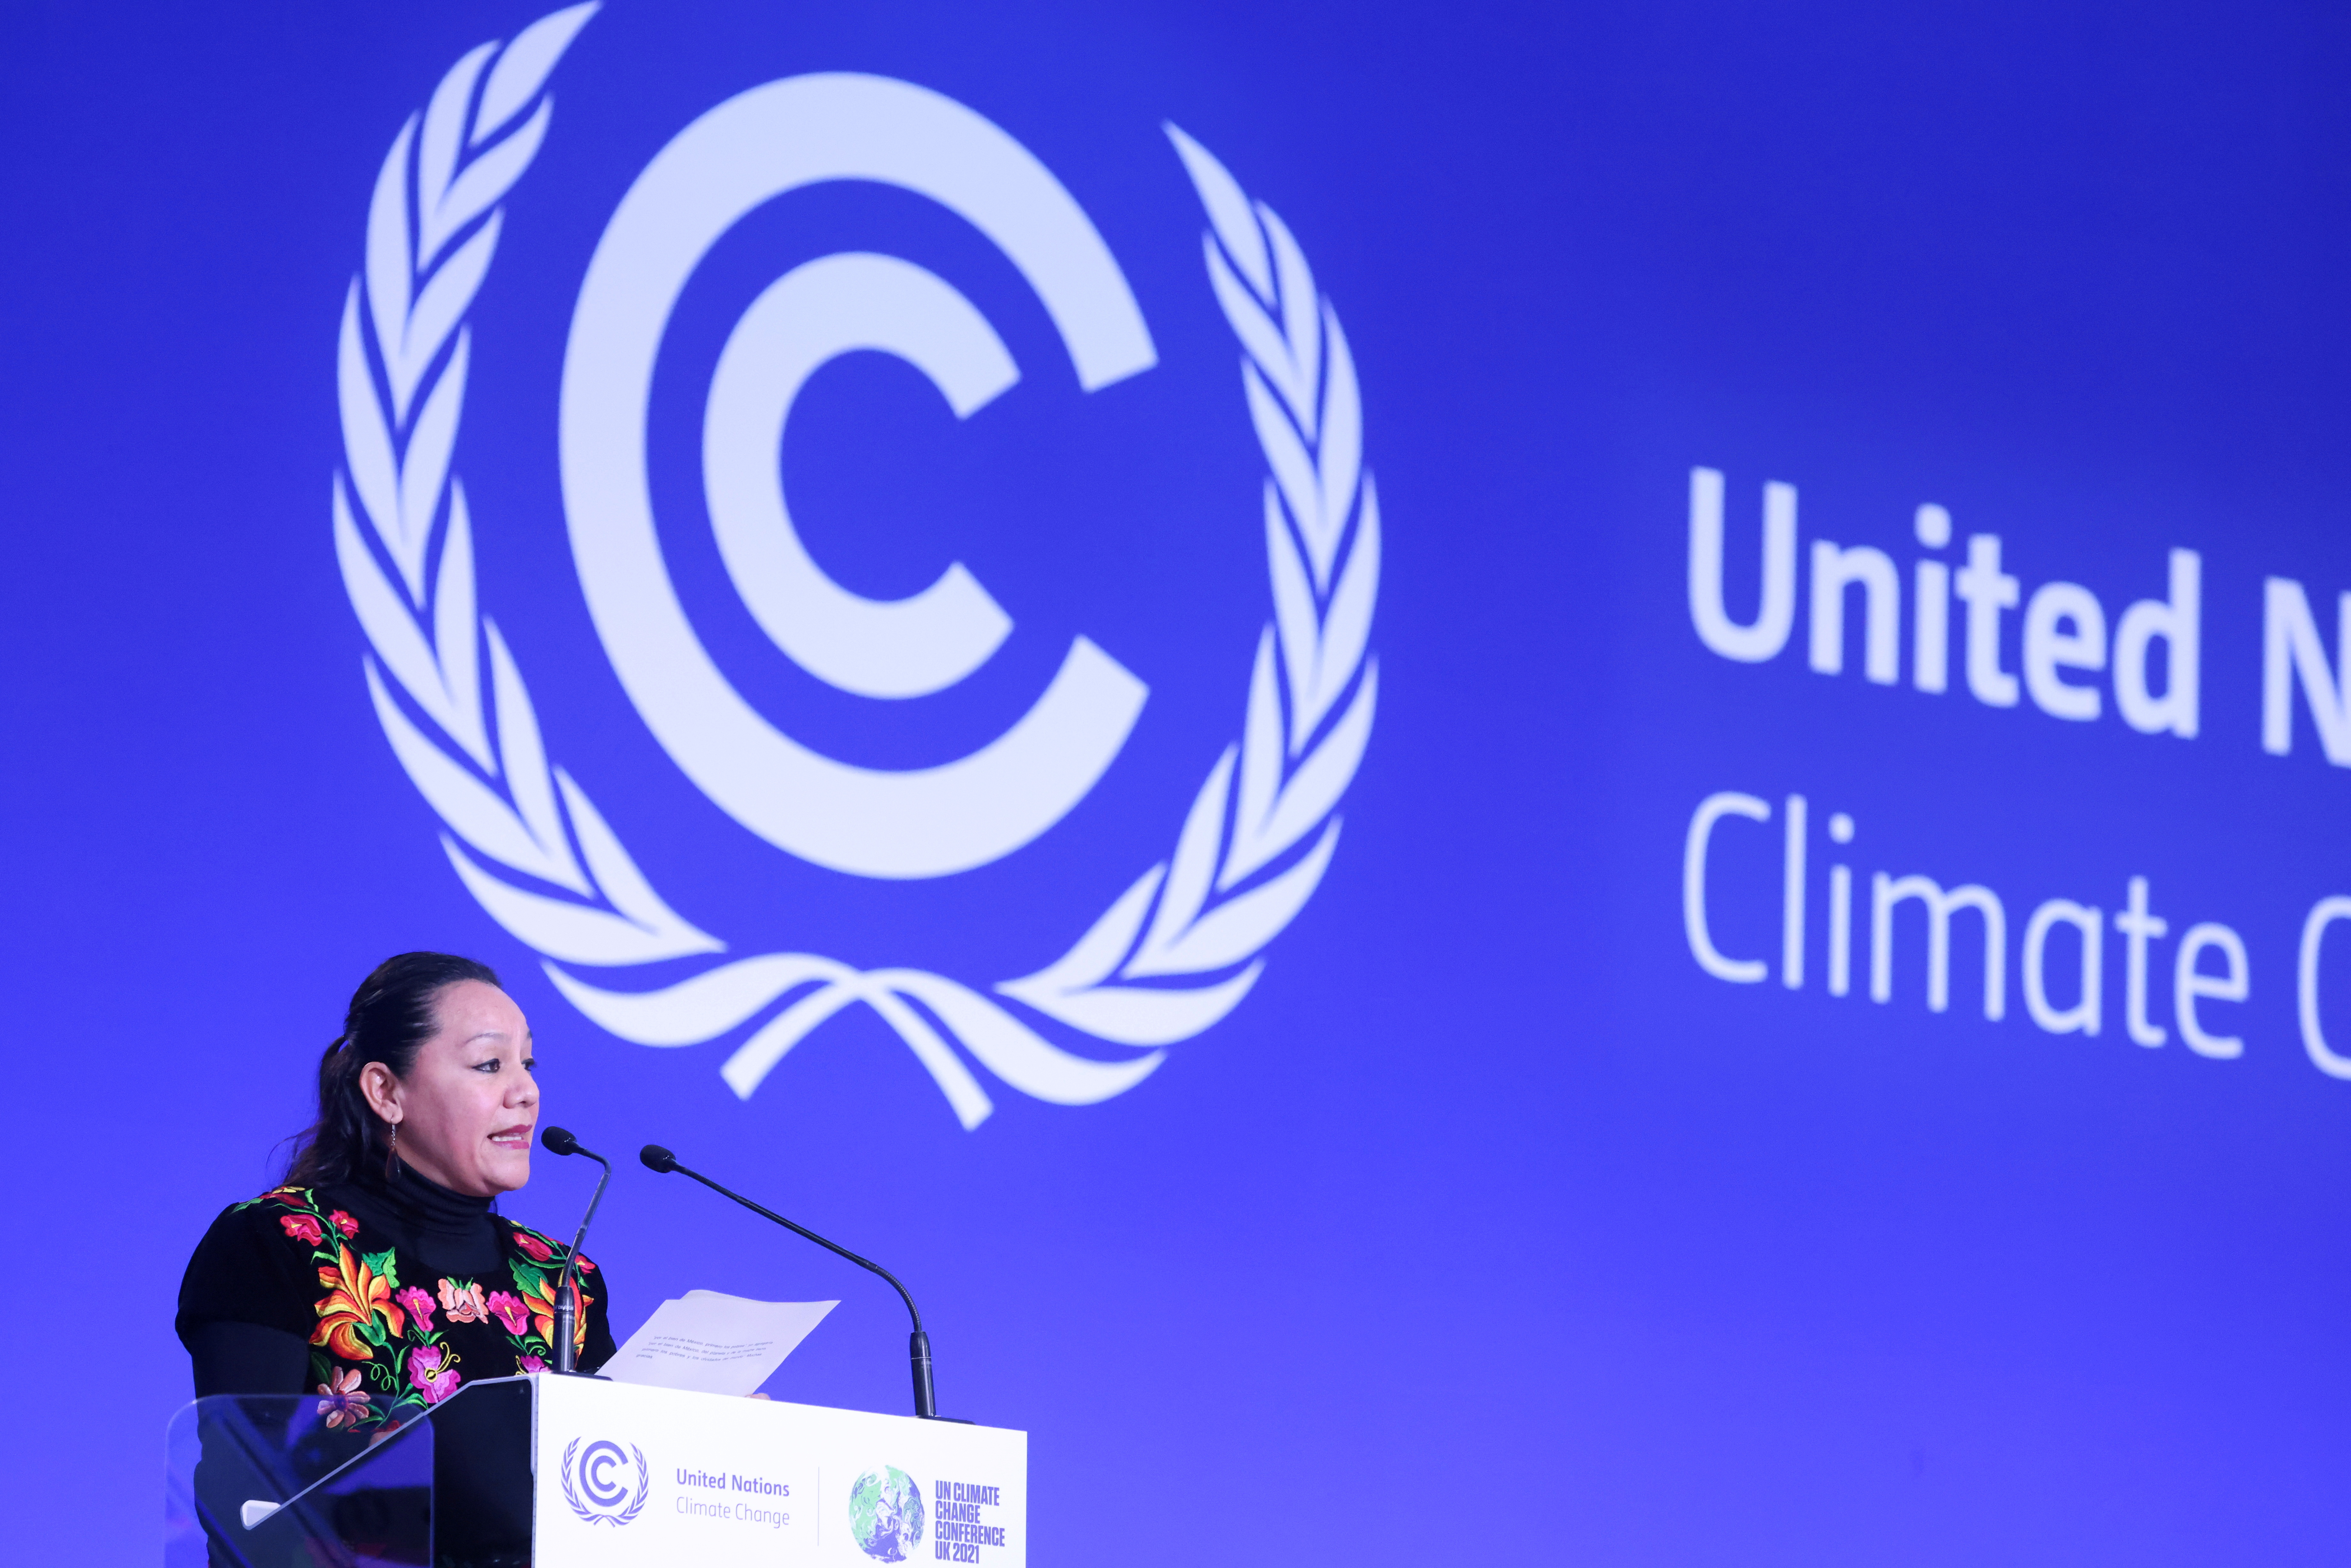 FILE PHOTO: Mexico's Secretary of Environment and Natural Resources, Maria Luisa Albores Gonzalez, speaks during the UN Climate Change Conference (COP26), in Glasgow, Scotland, Britain, November 10, 2021. REUTERS/Yves Herman/File Photo